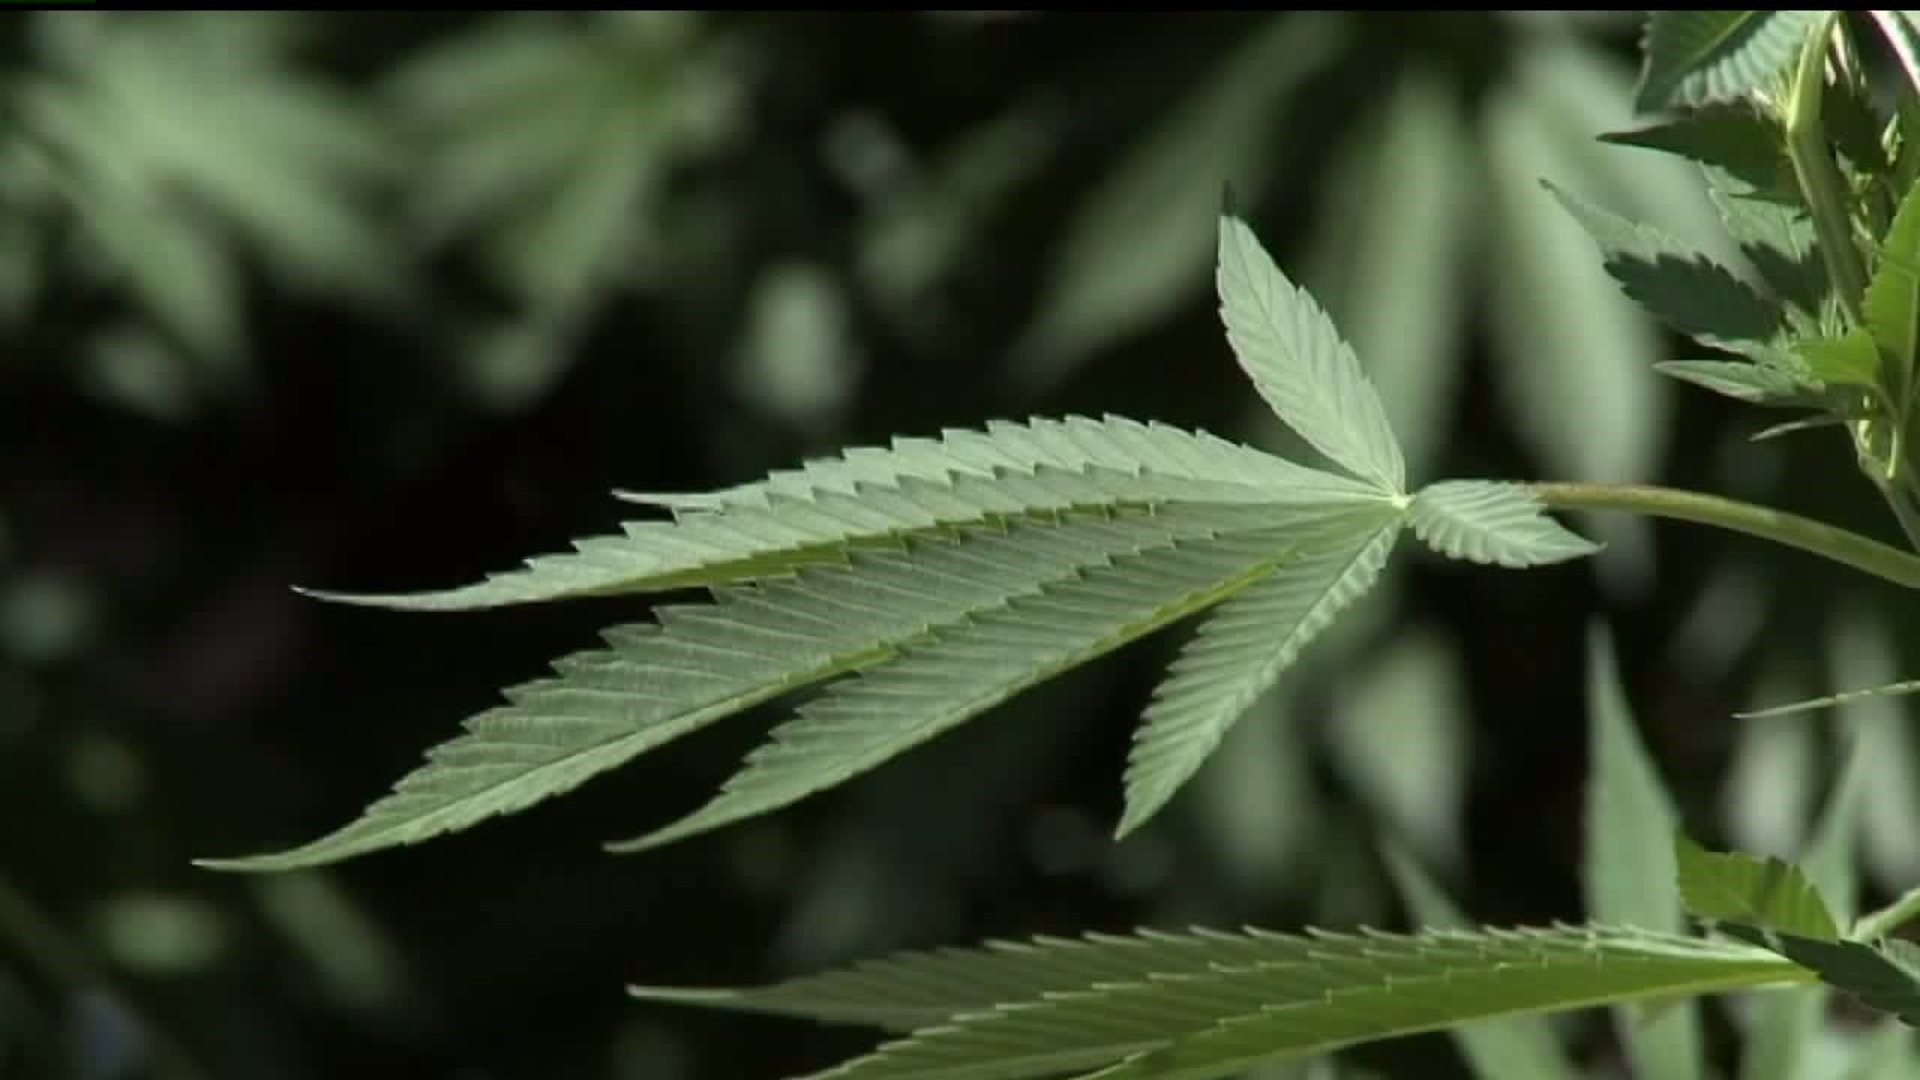 Governor issues call for people to apply for pardons for non-violent marijuana convictions